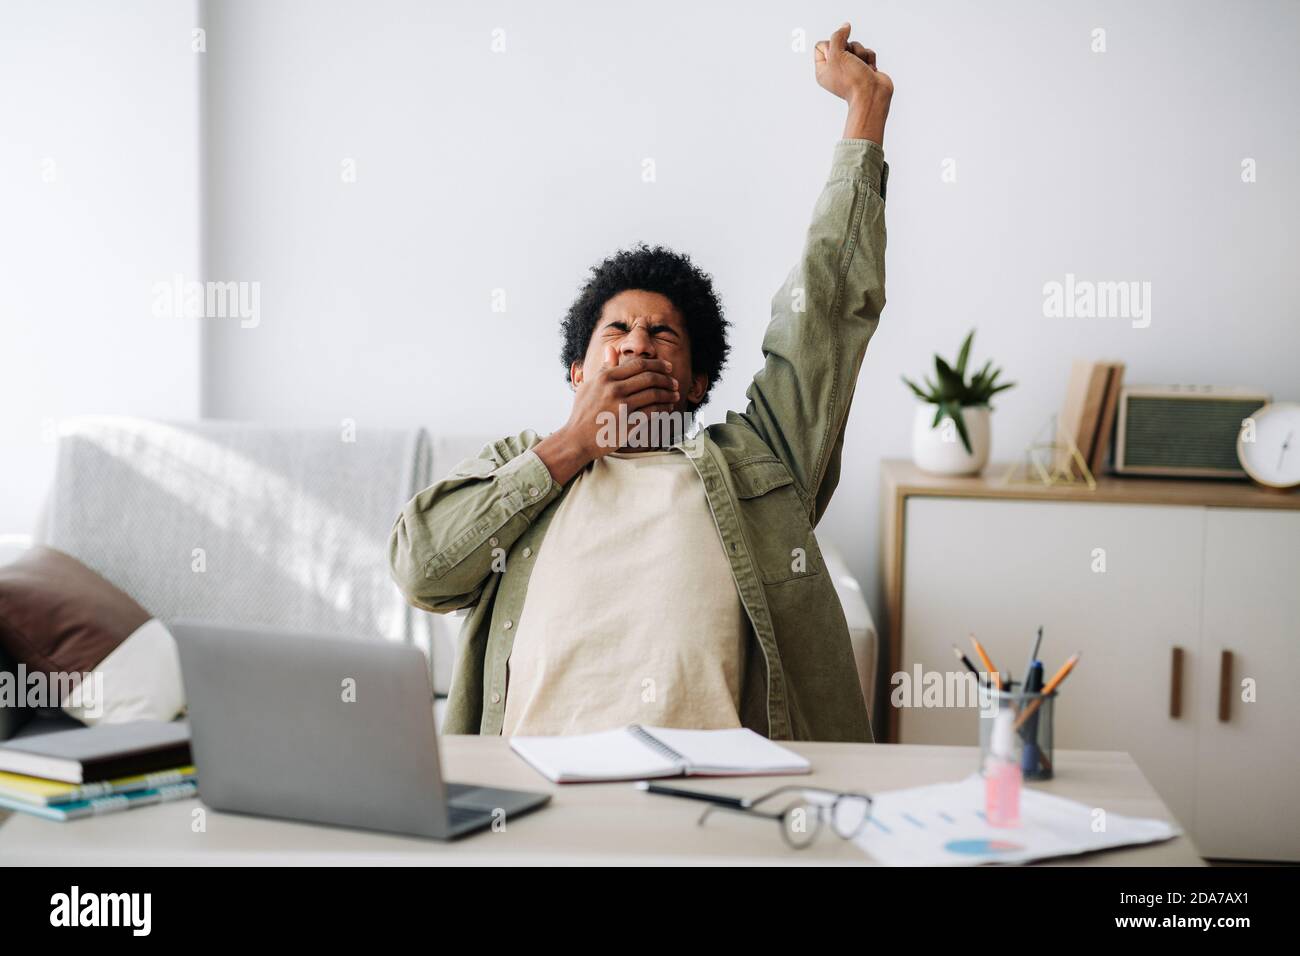 Tired black student yawning and stretching during his remote studies from home Stock Photo